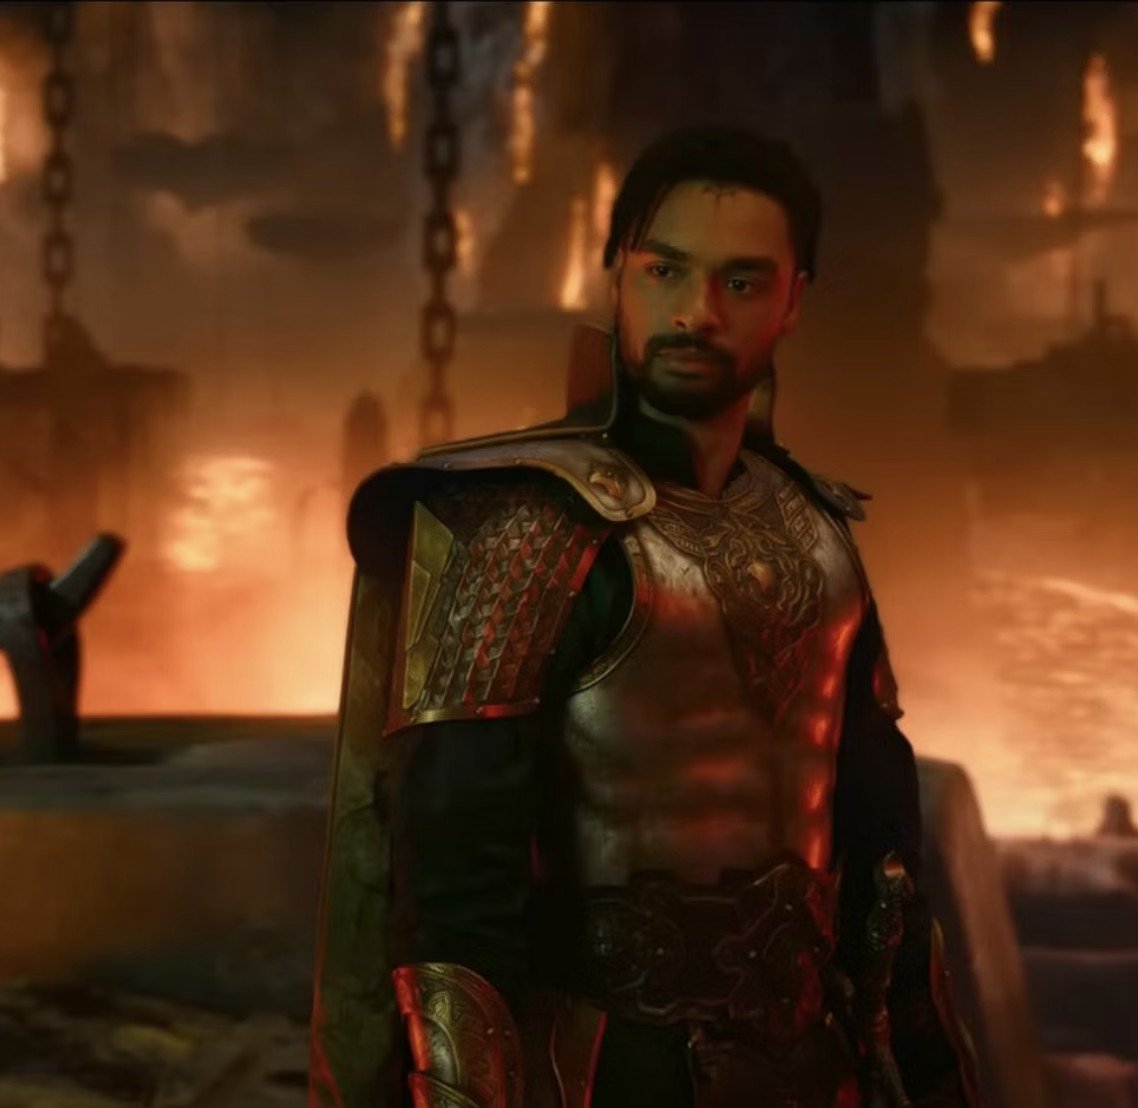 In a scene from the movie D&amp;D: Honor Among Thieves, Xenk (Rege-Jean Page), a paladin wearing ornate metal armor, looks disapproving, with a ruined bridge behind him.